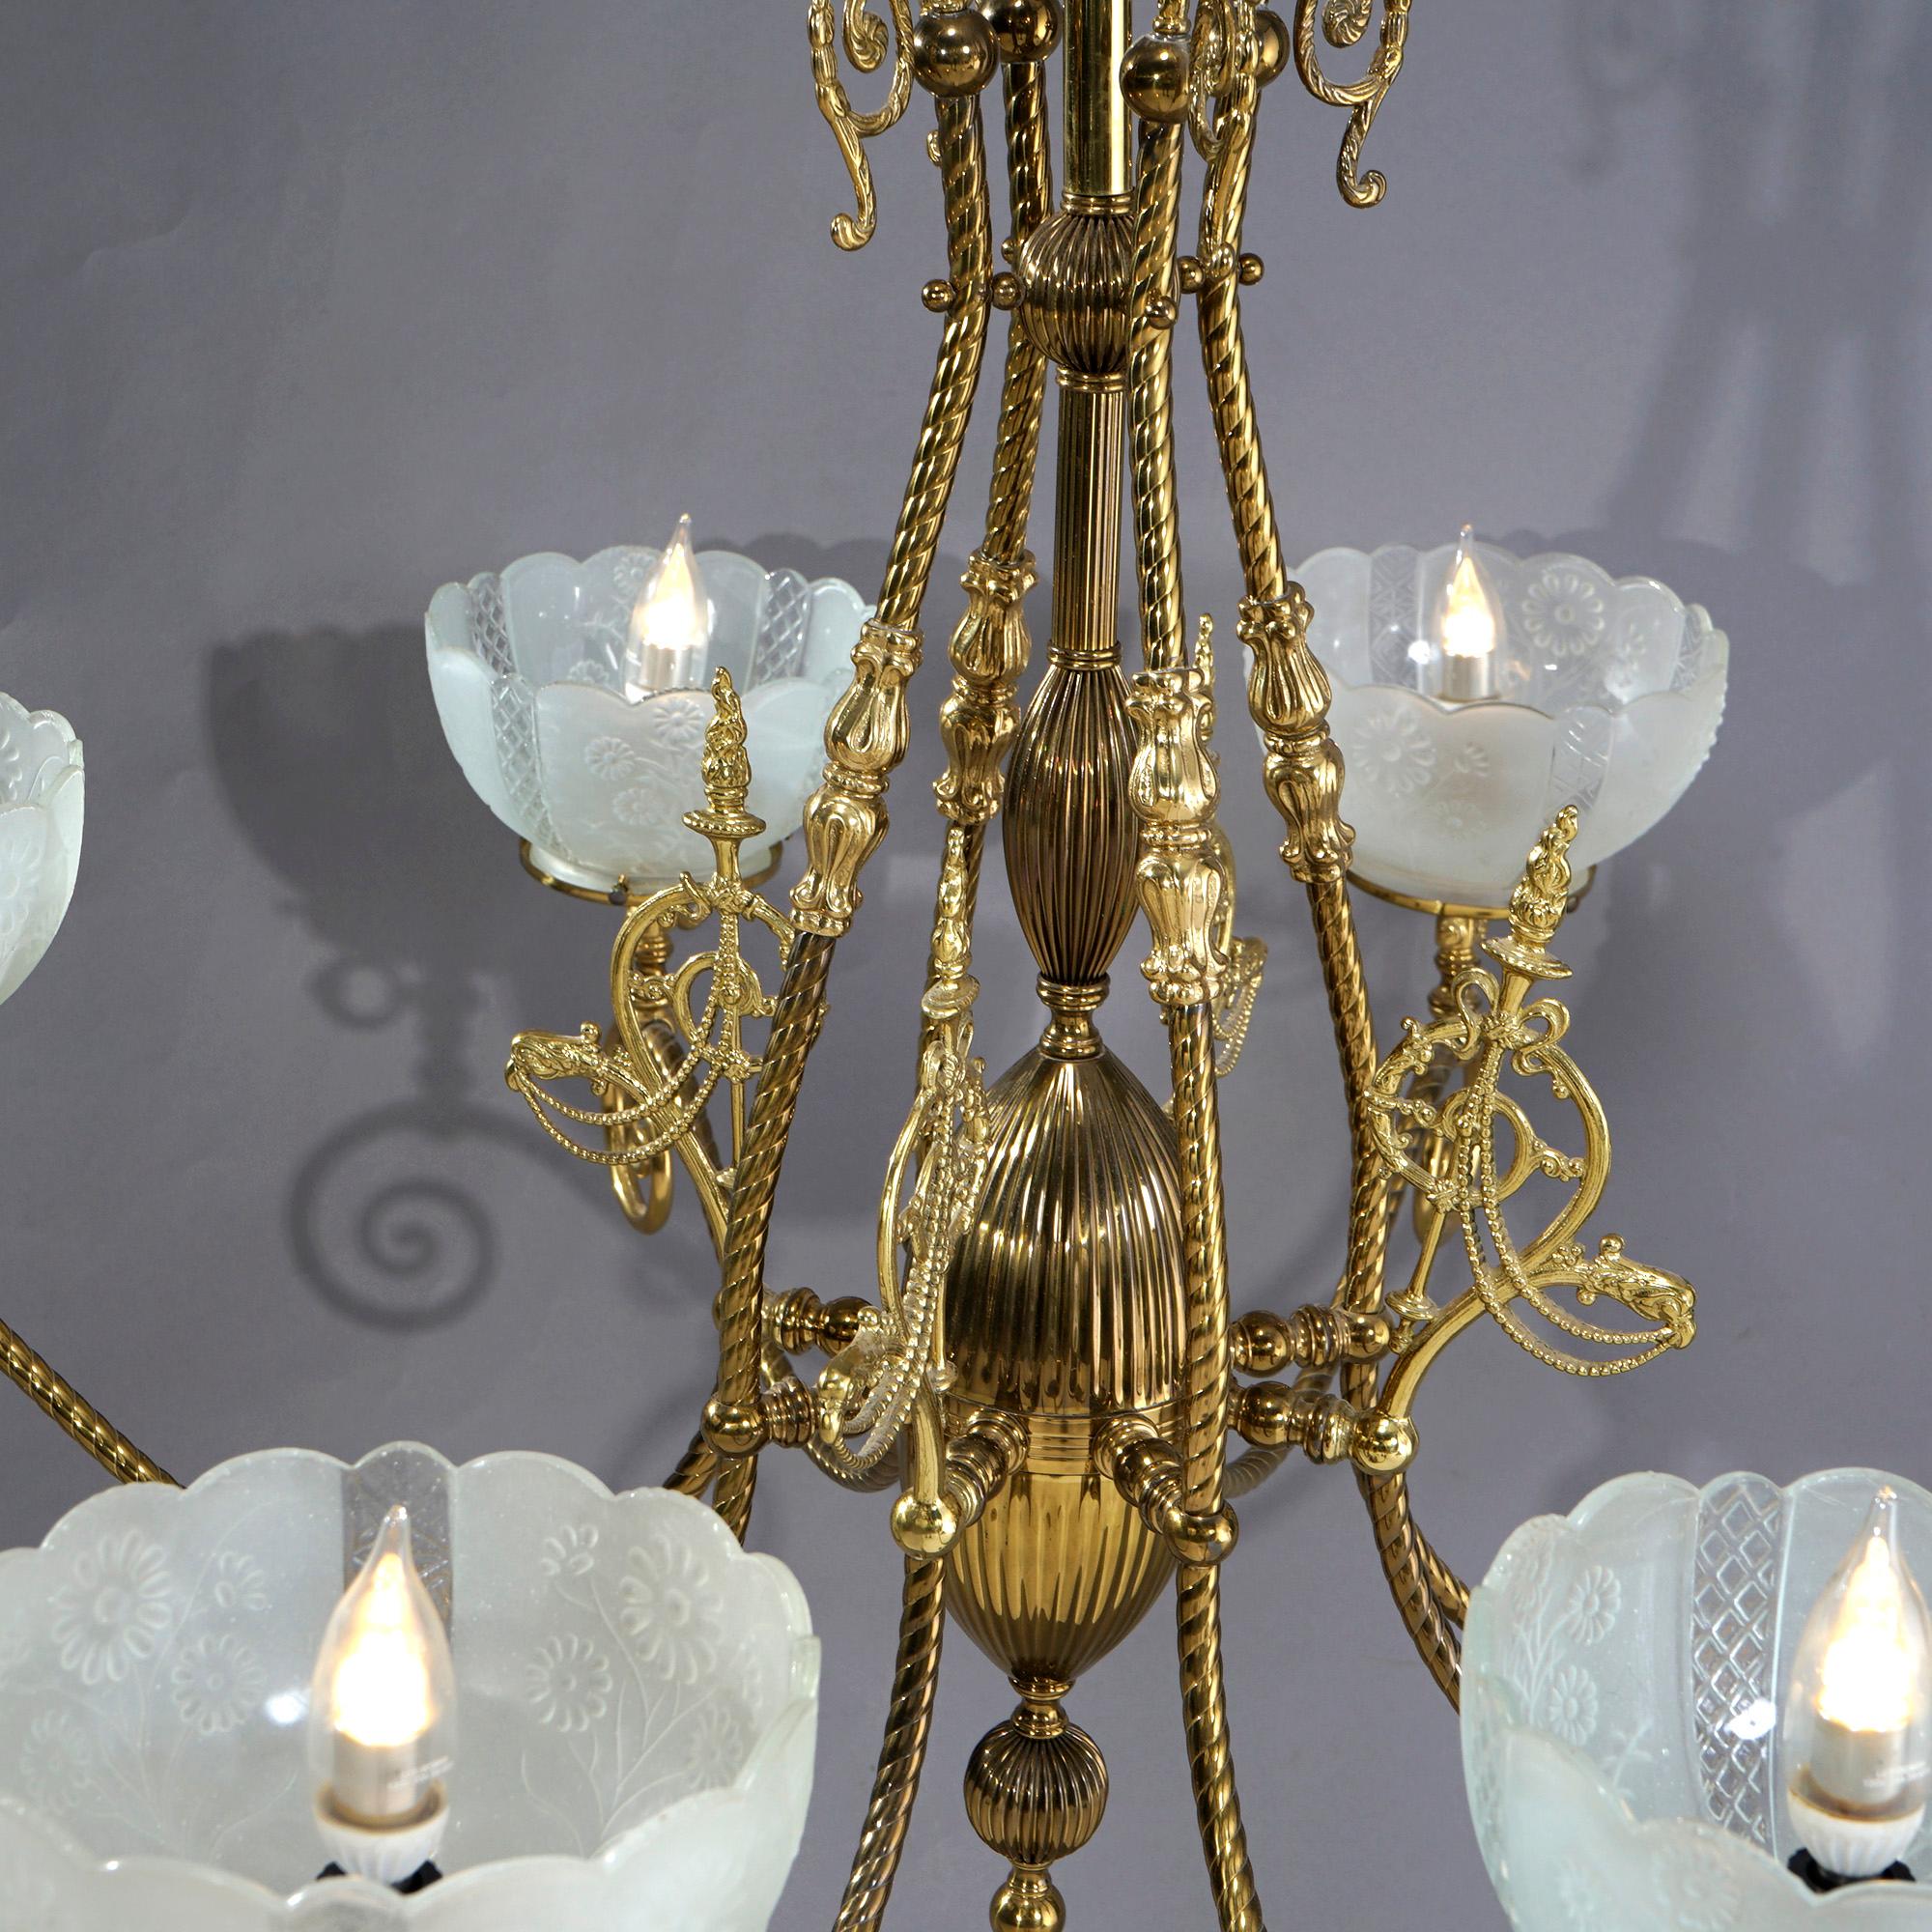 American Monumental Antique Victorian Brass & Glass Electrified Gas Chandelier, c1890